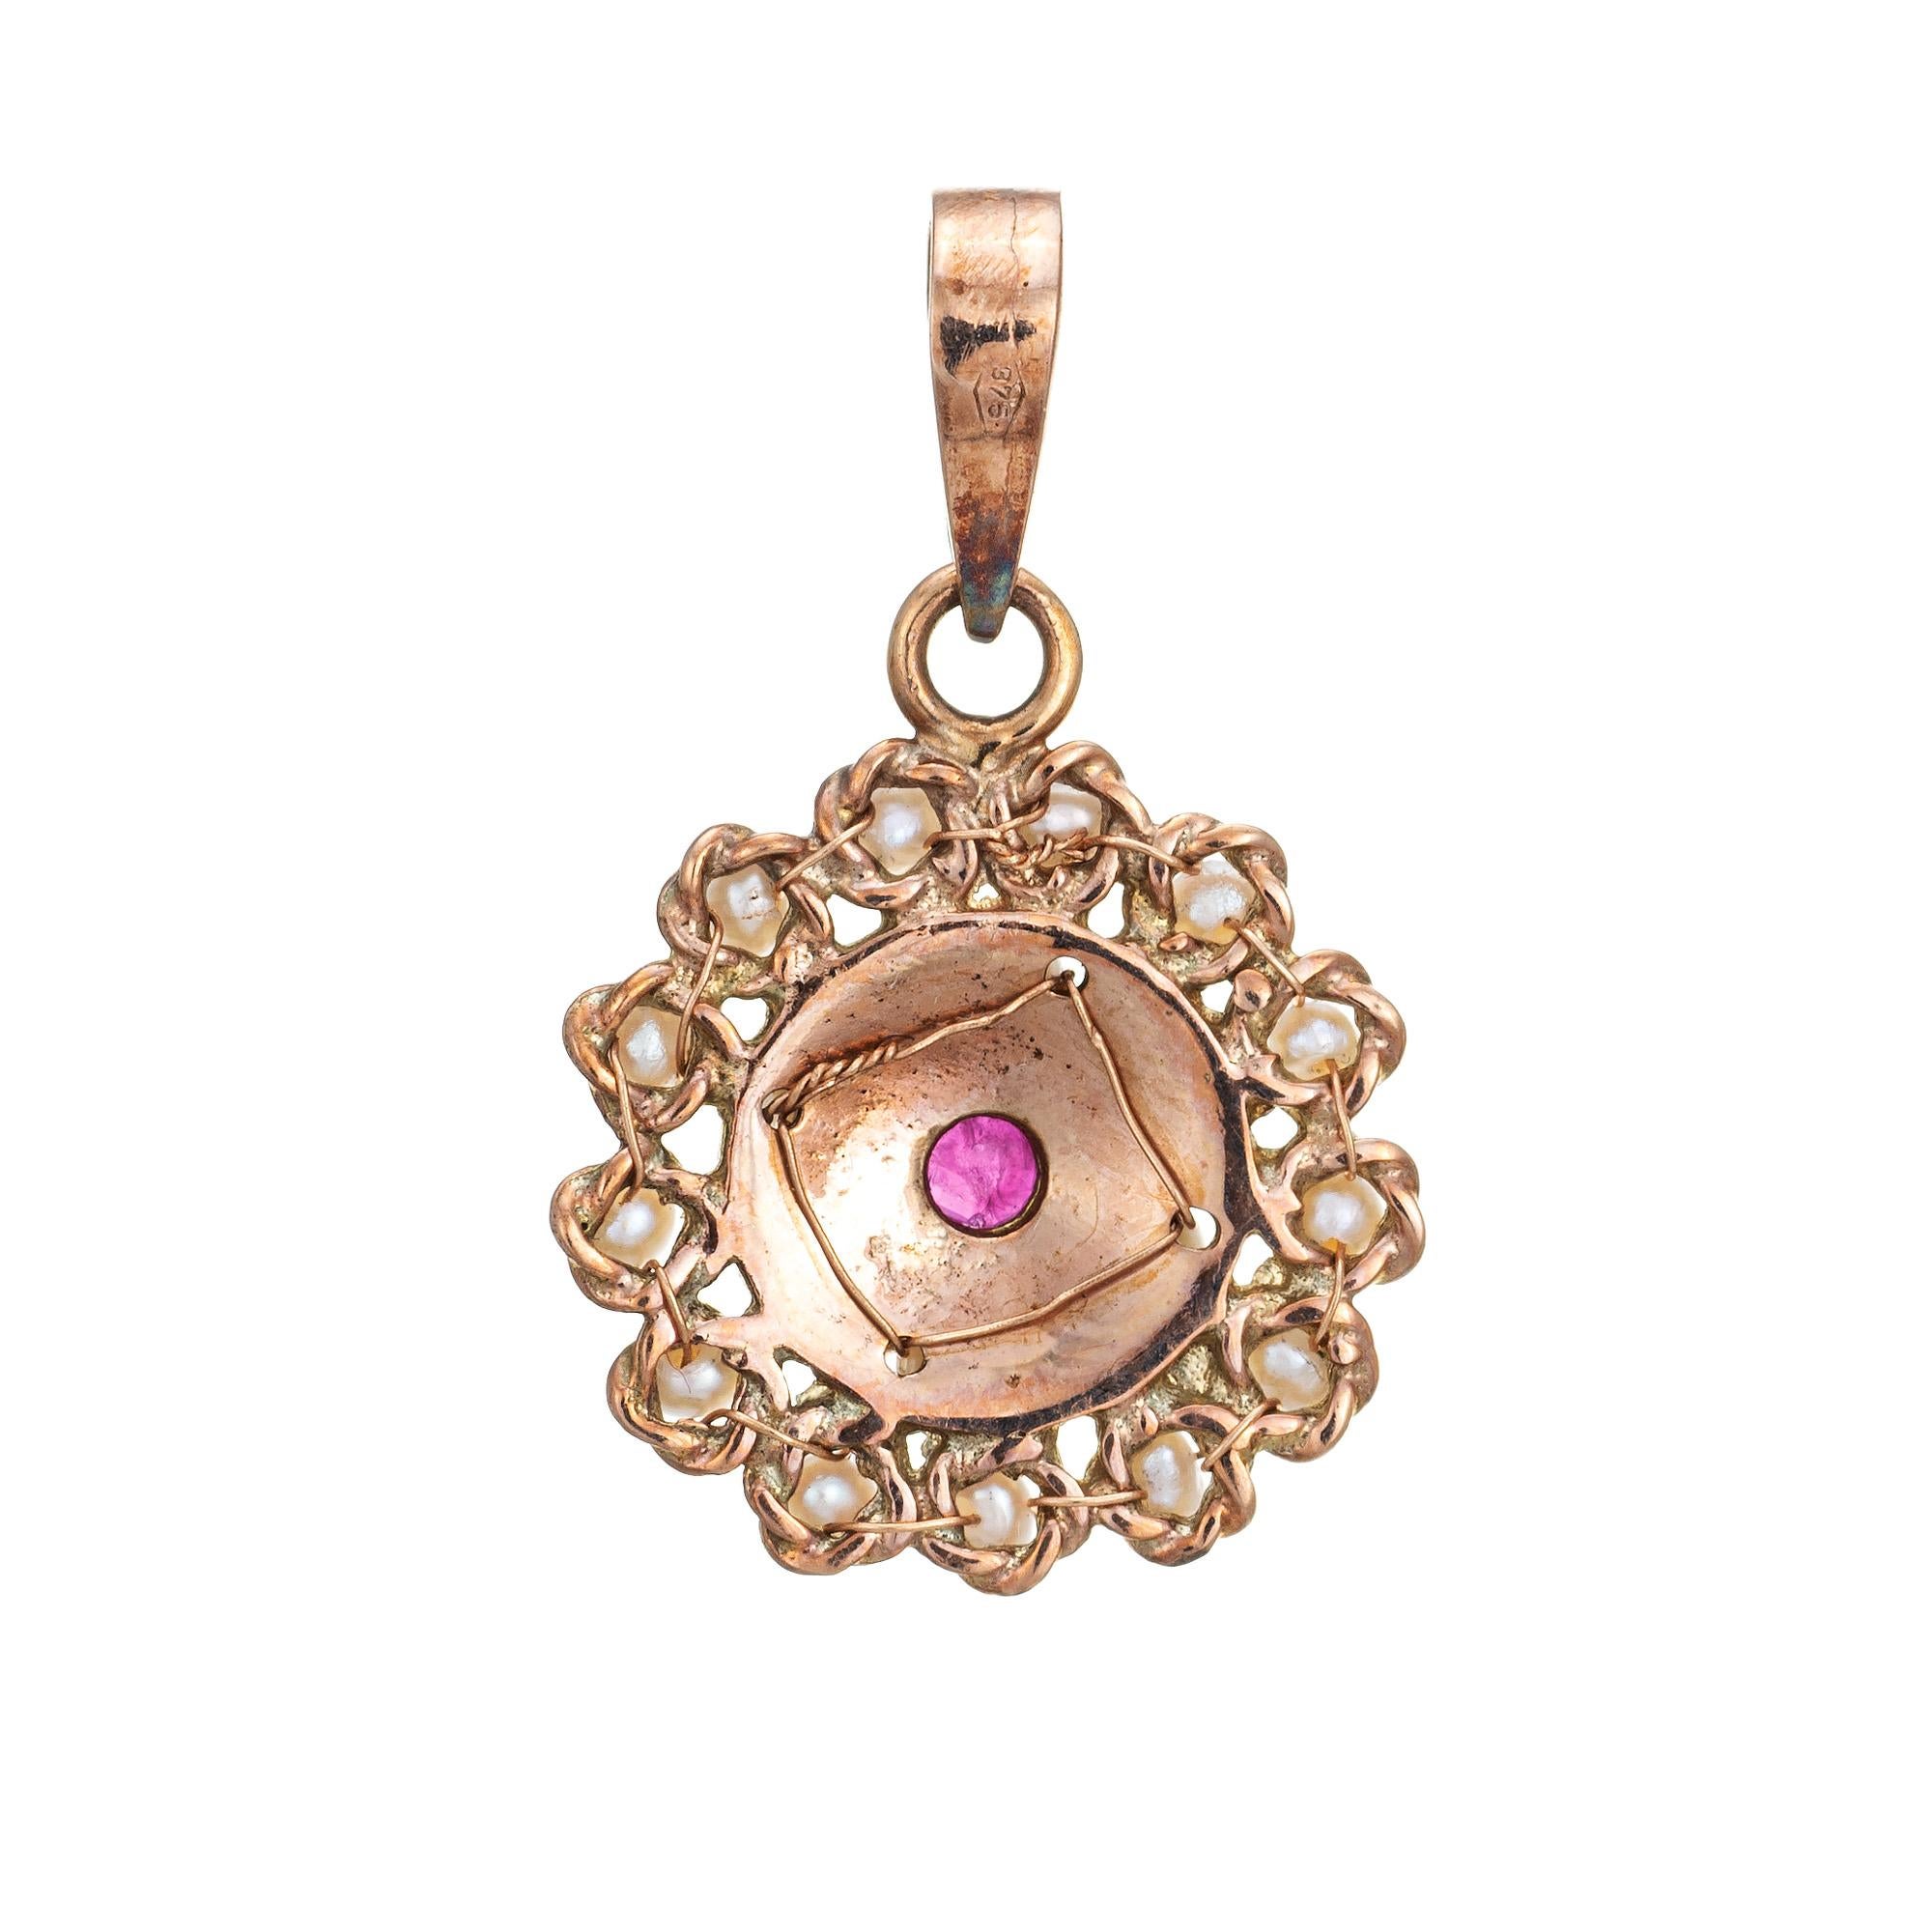 Finely detailed vintage ruby & cultured pearl pendant crafted in 14k yellow gold (circa 1950s to 1960s).  

Center set ruby measures 2.5mm, accented with cultured & natural pearls measuring 1.5mm to 2mm.

The nicely detailed pendant is small in